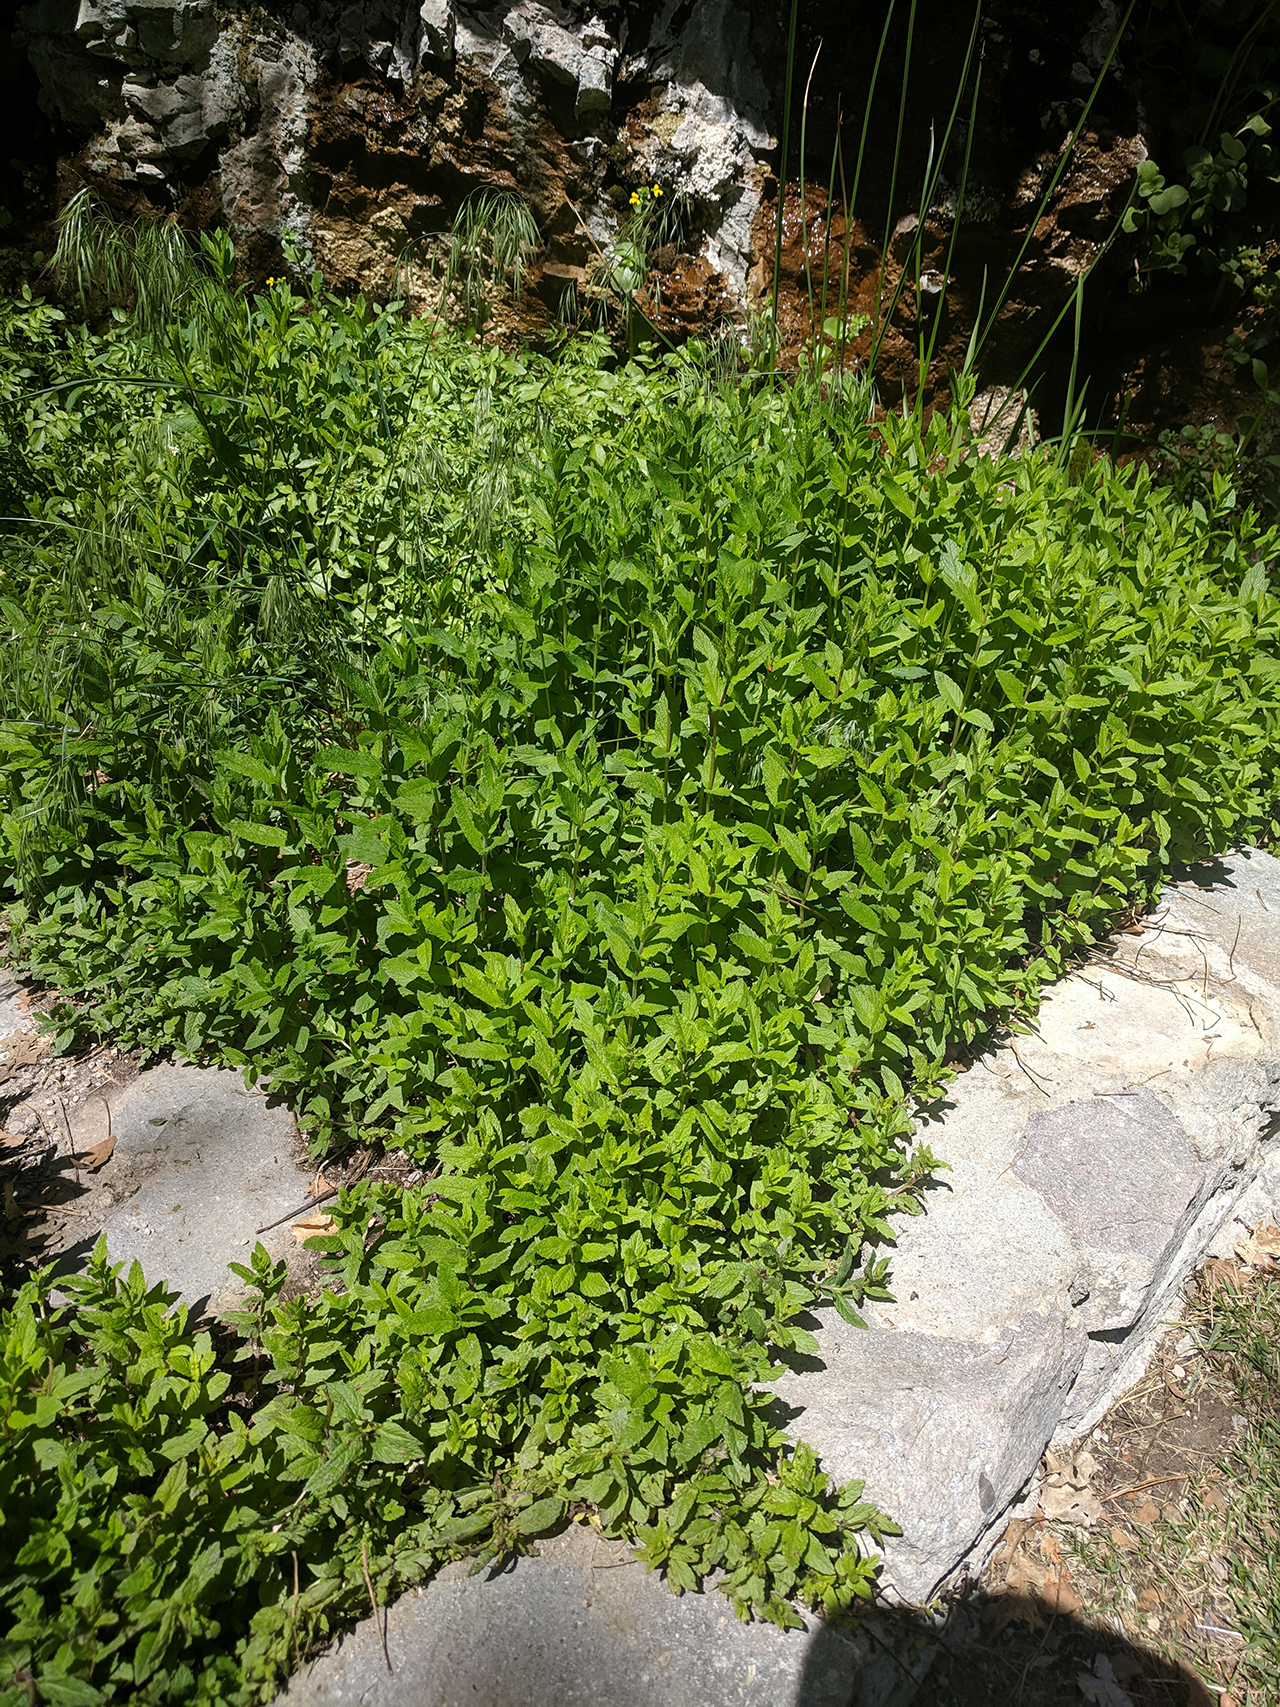 A large patch of mint growing in the spring waters